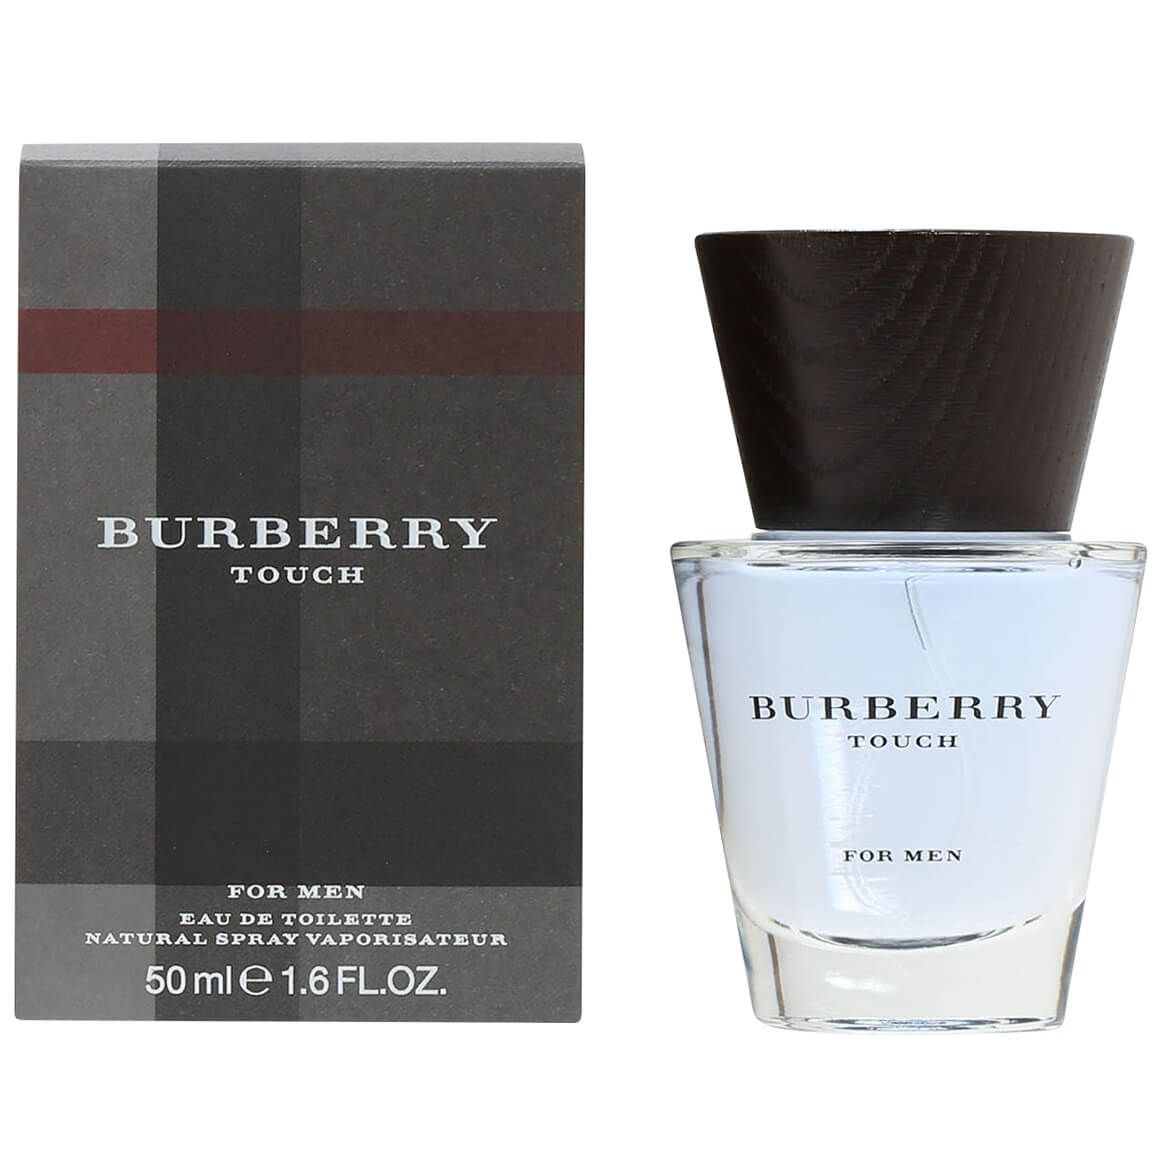 Burberry Touch by Burberry for Men EDT, 1.7 oz. + '-' + 373145